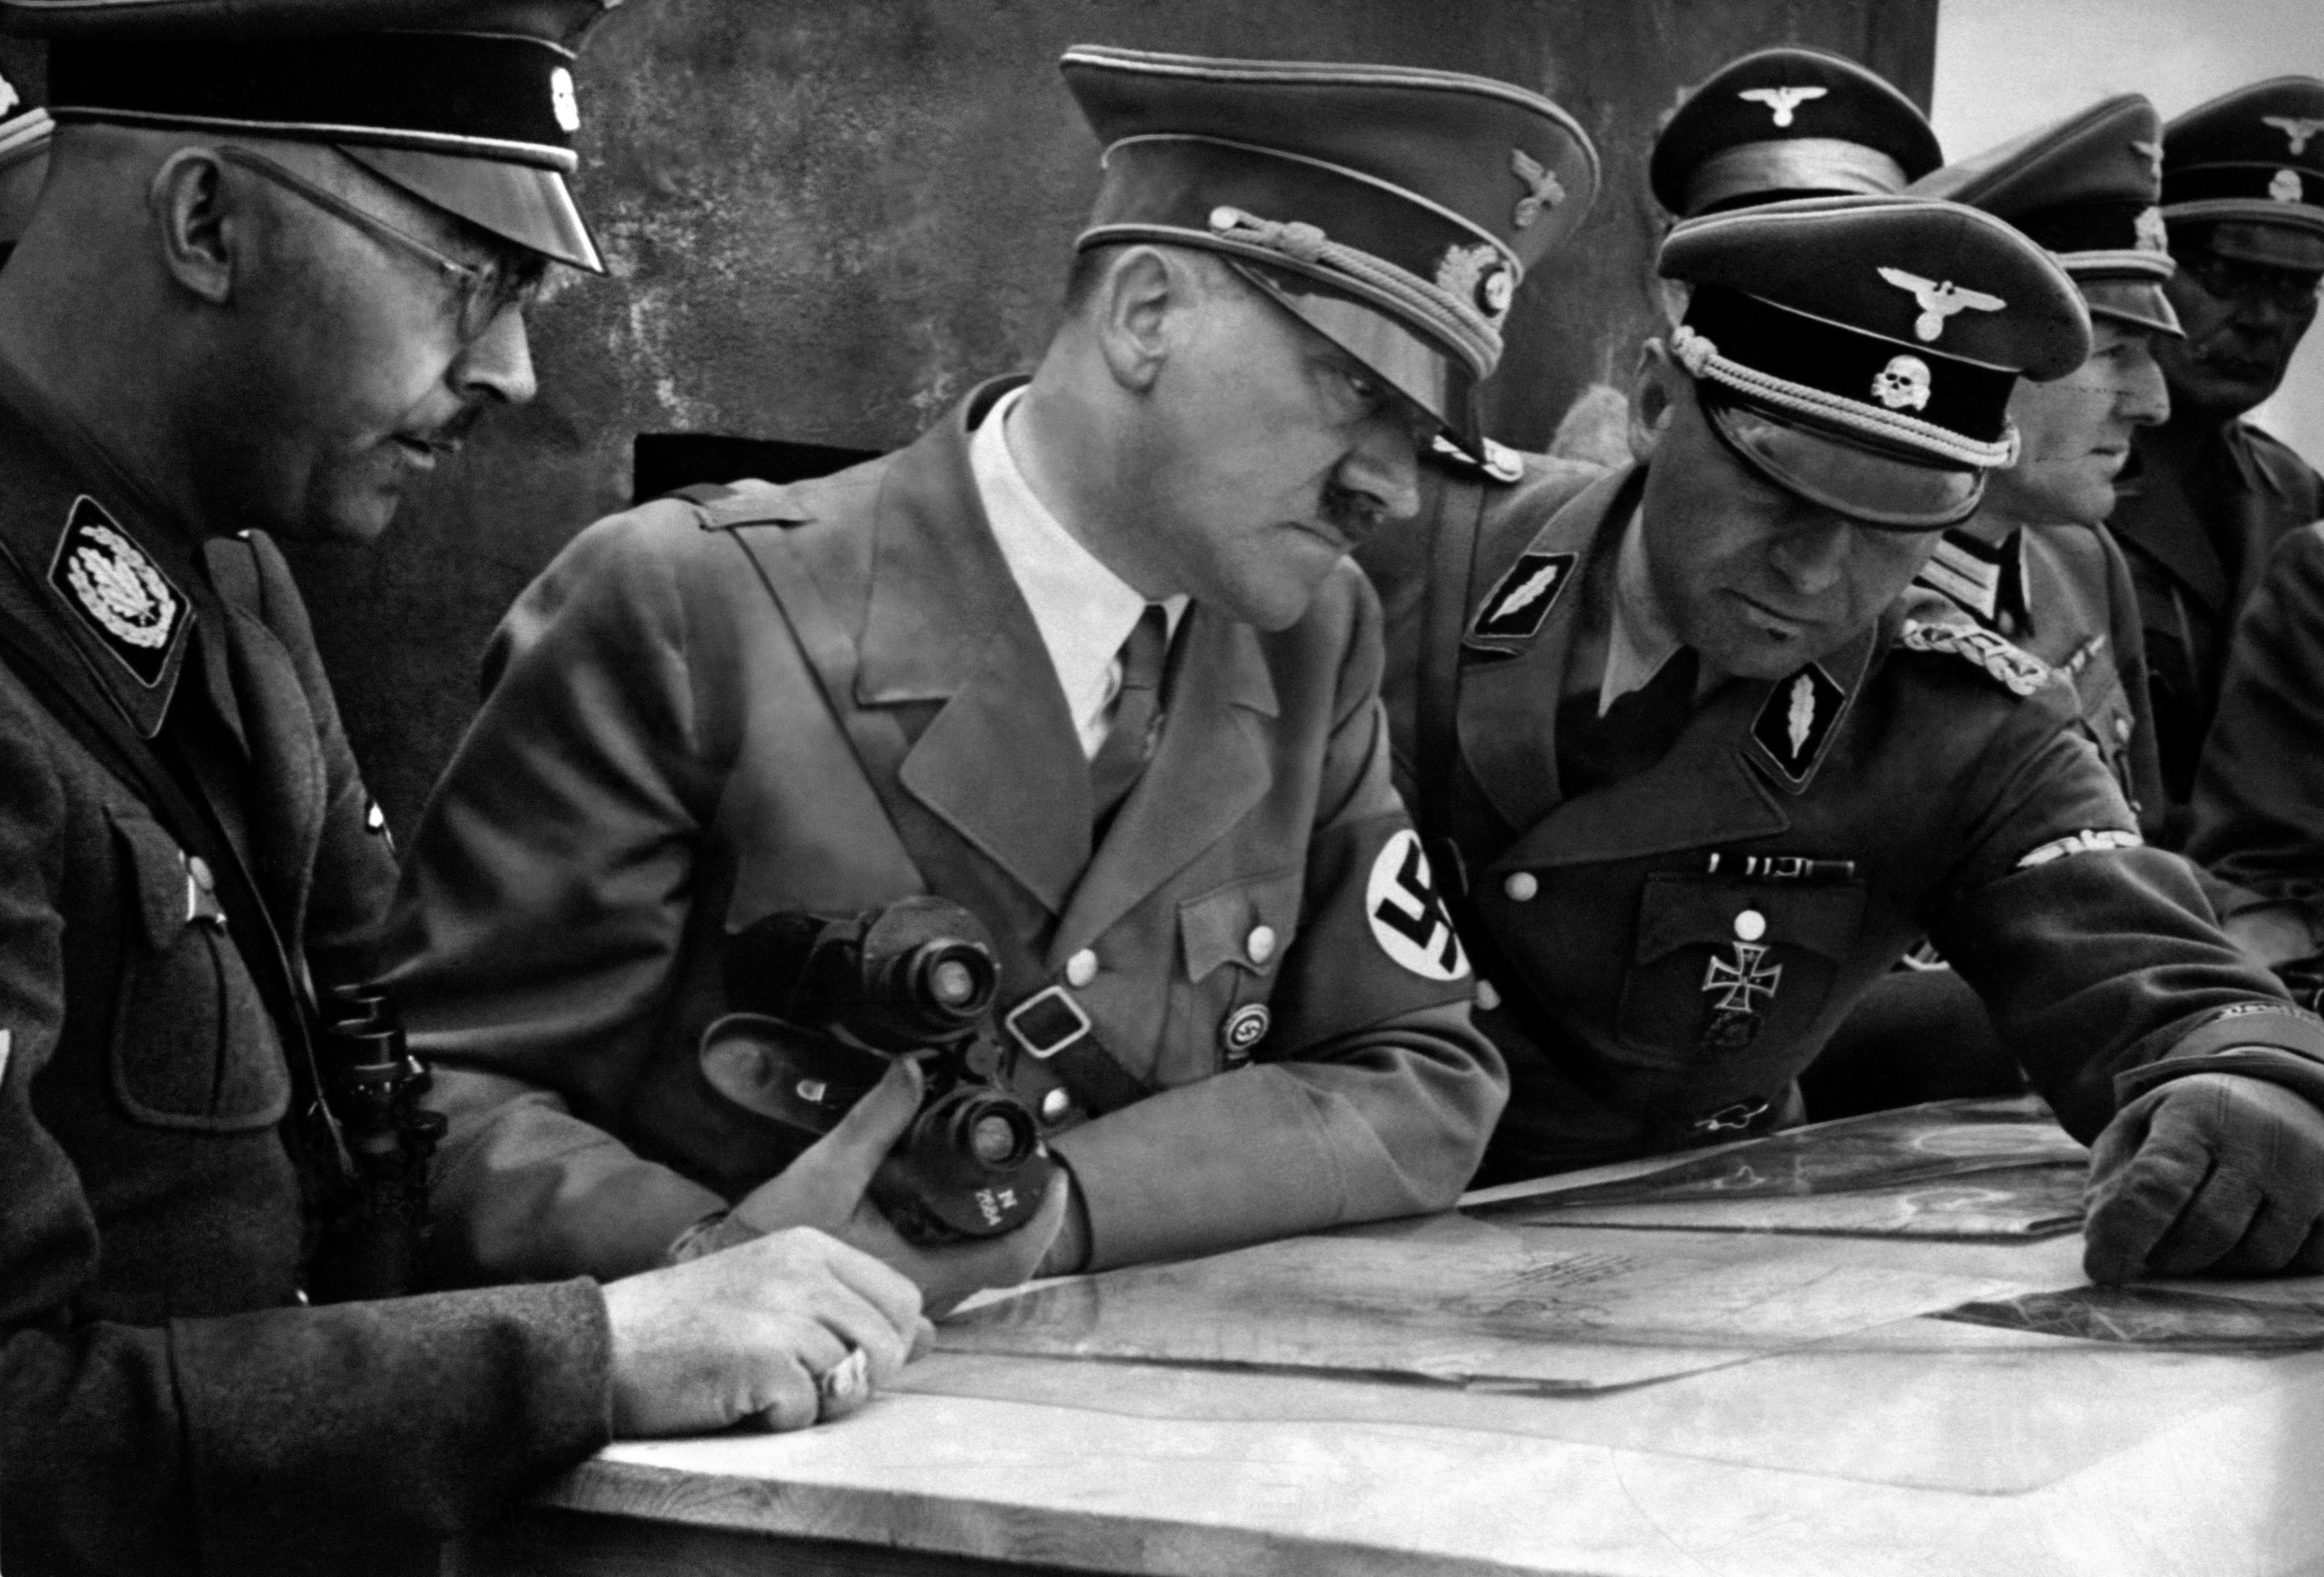 <p>A picture dated 1939 shows German Nazi Chancellor and dictator Adolf Hitler (C) consulting a geographical survey map with his general staff including Heinrich Himmler (L) and Martin Bormann (R) at an unlocated place during World War II</p>